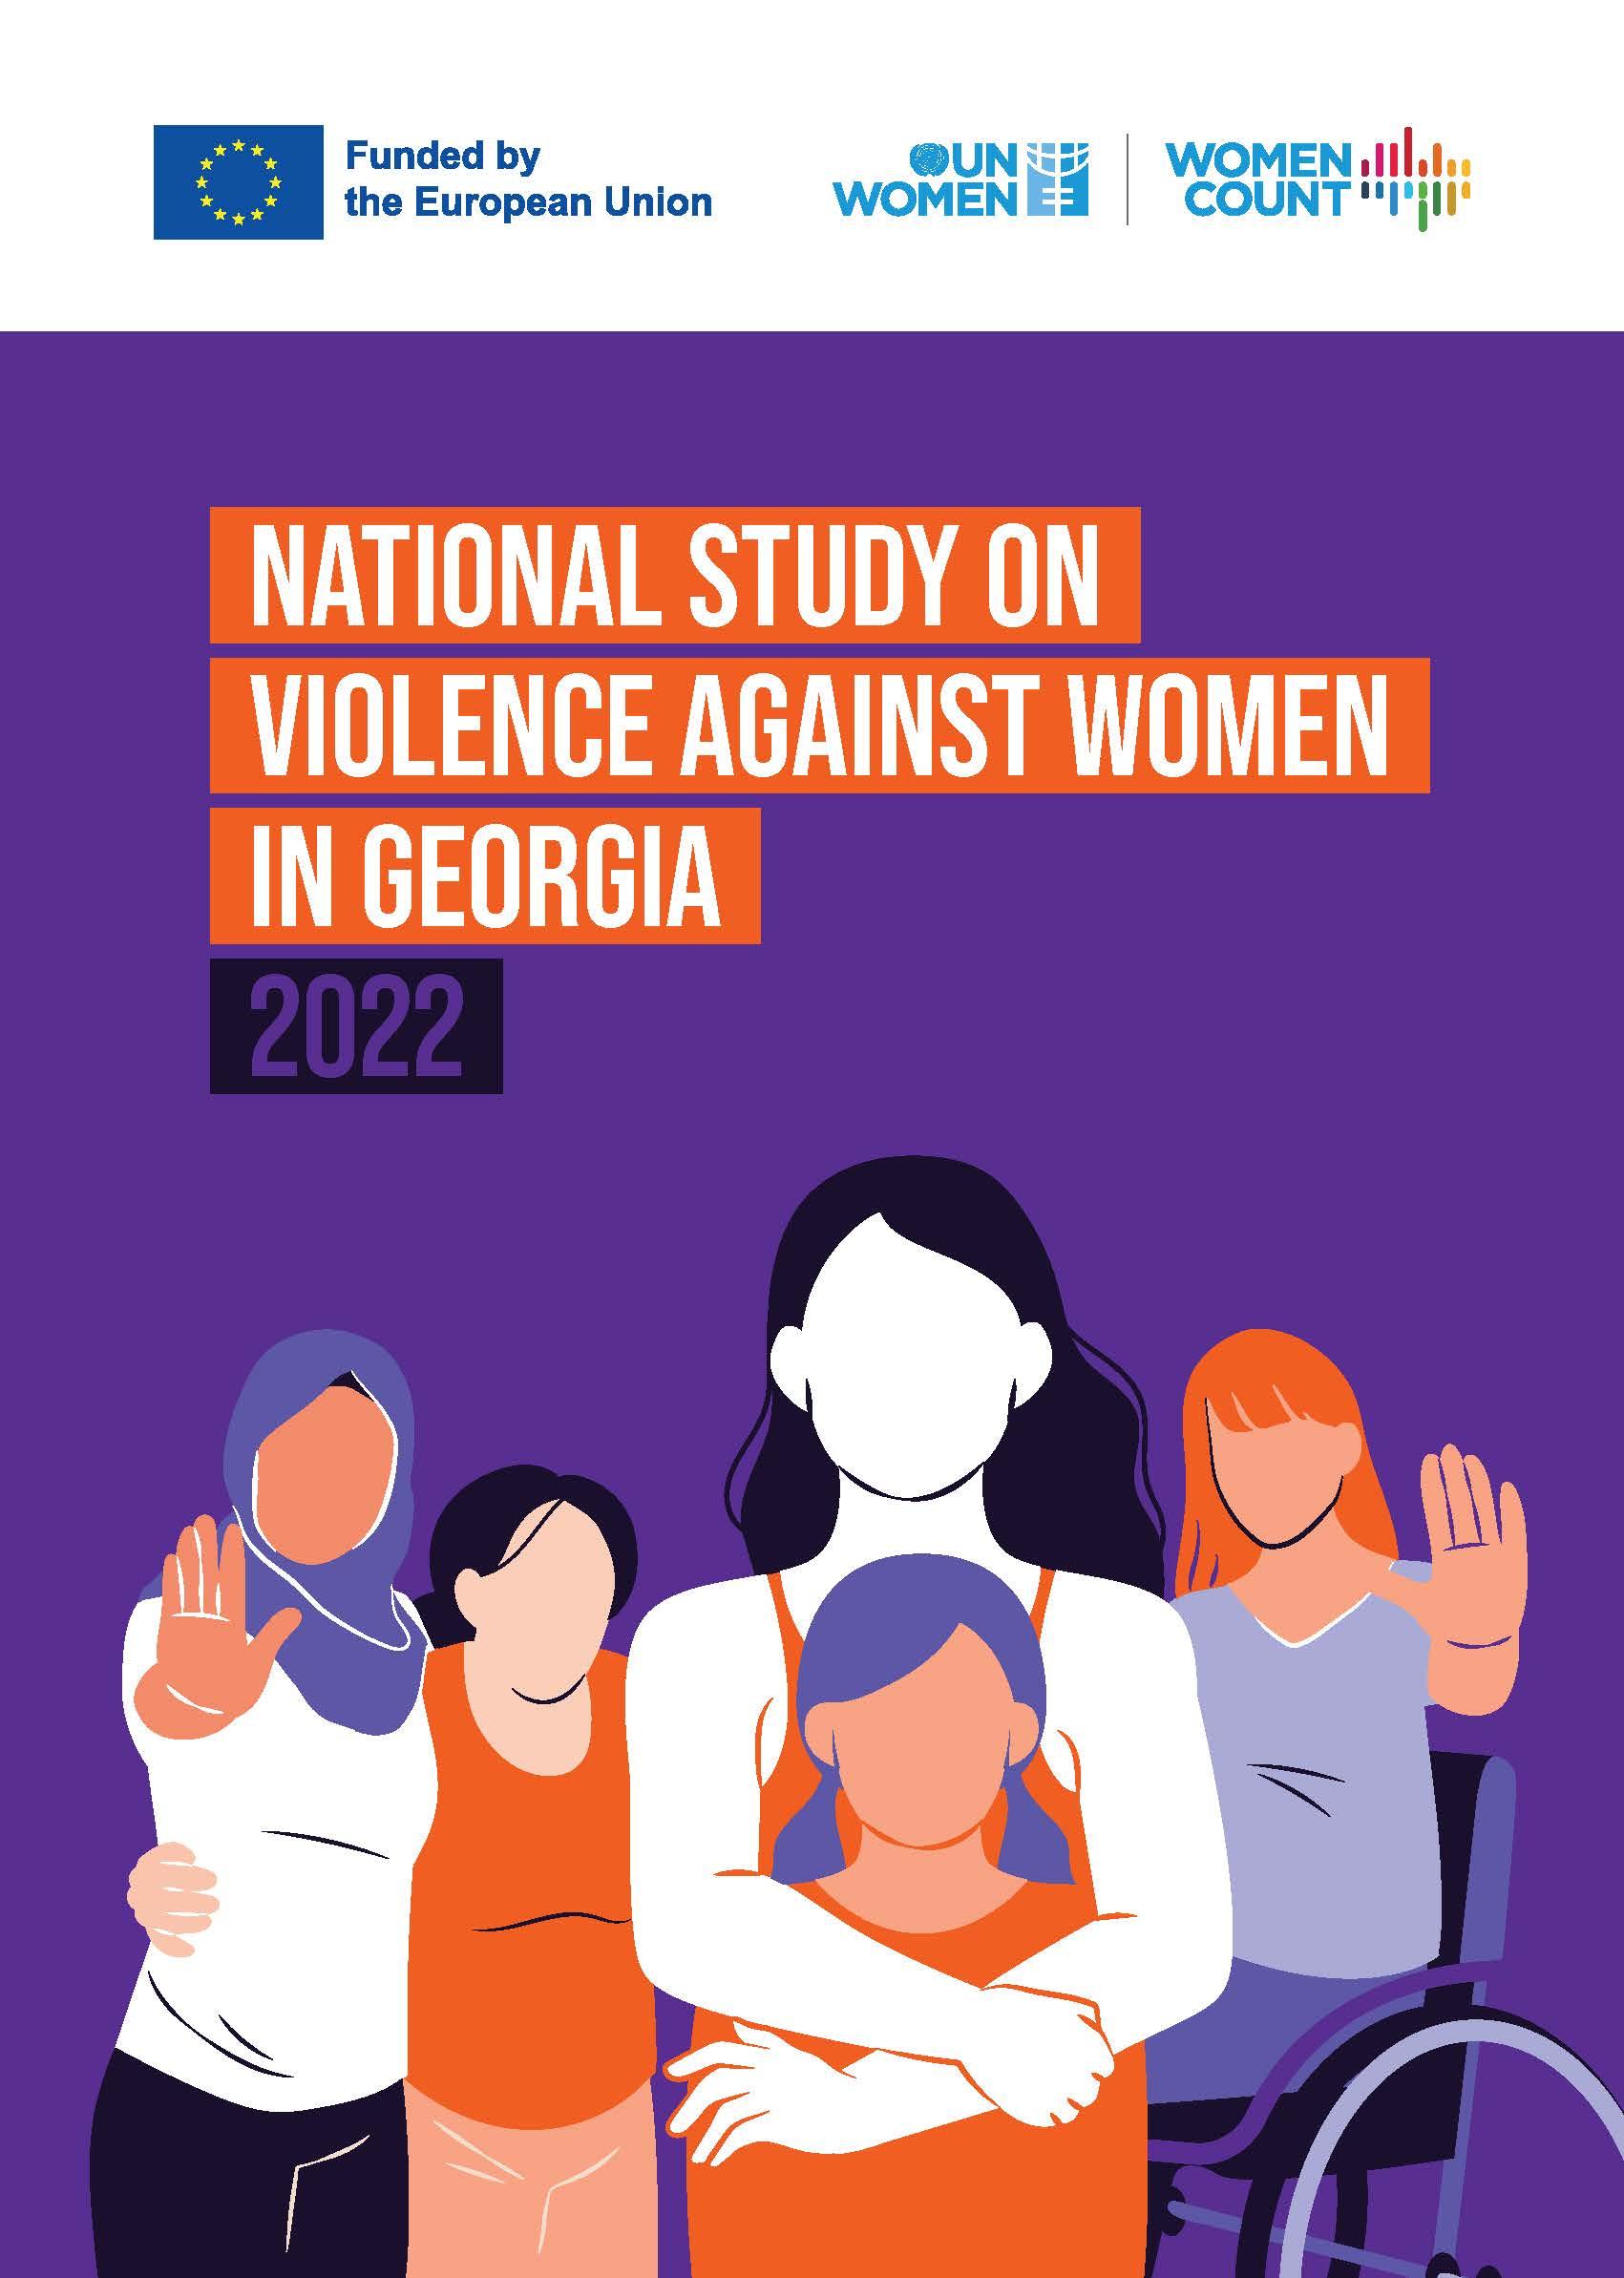 New study shows social norms regarding violence against women are changing in Georgia